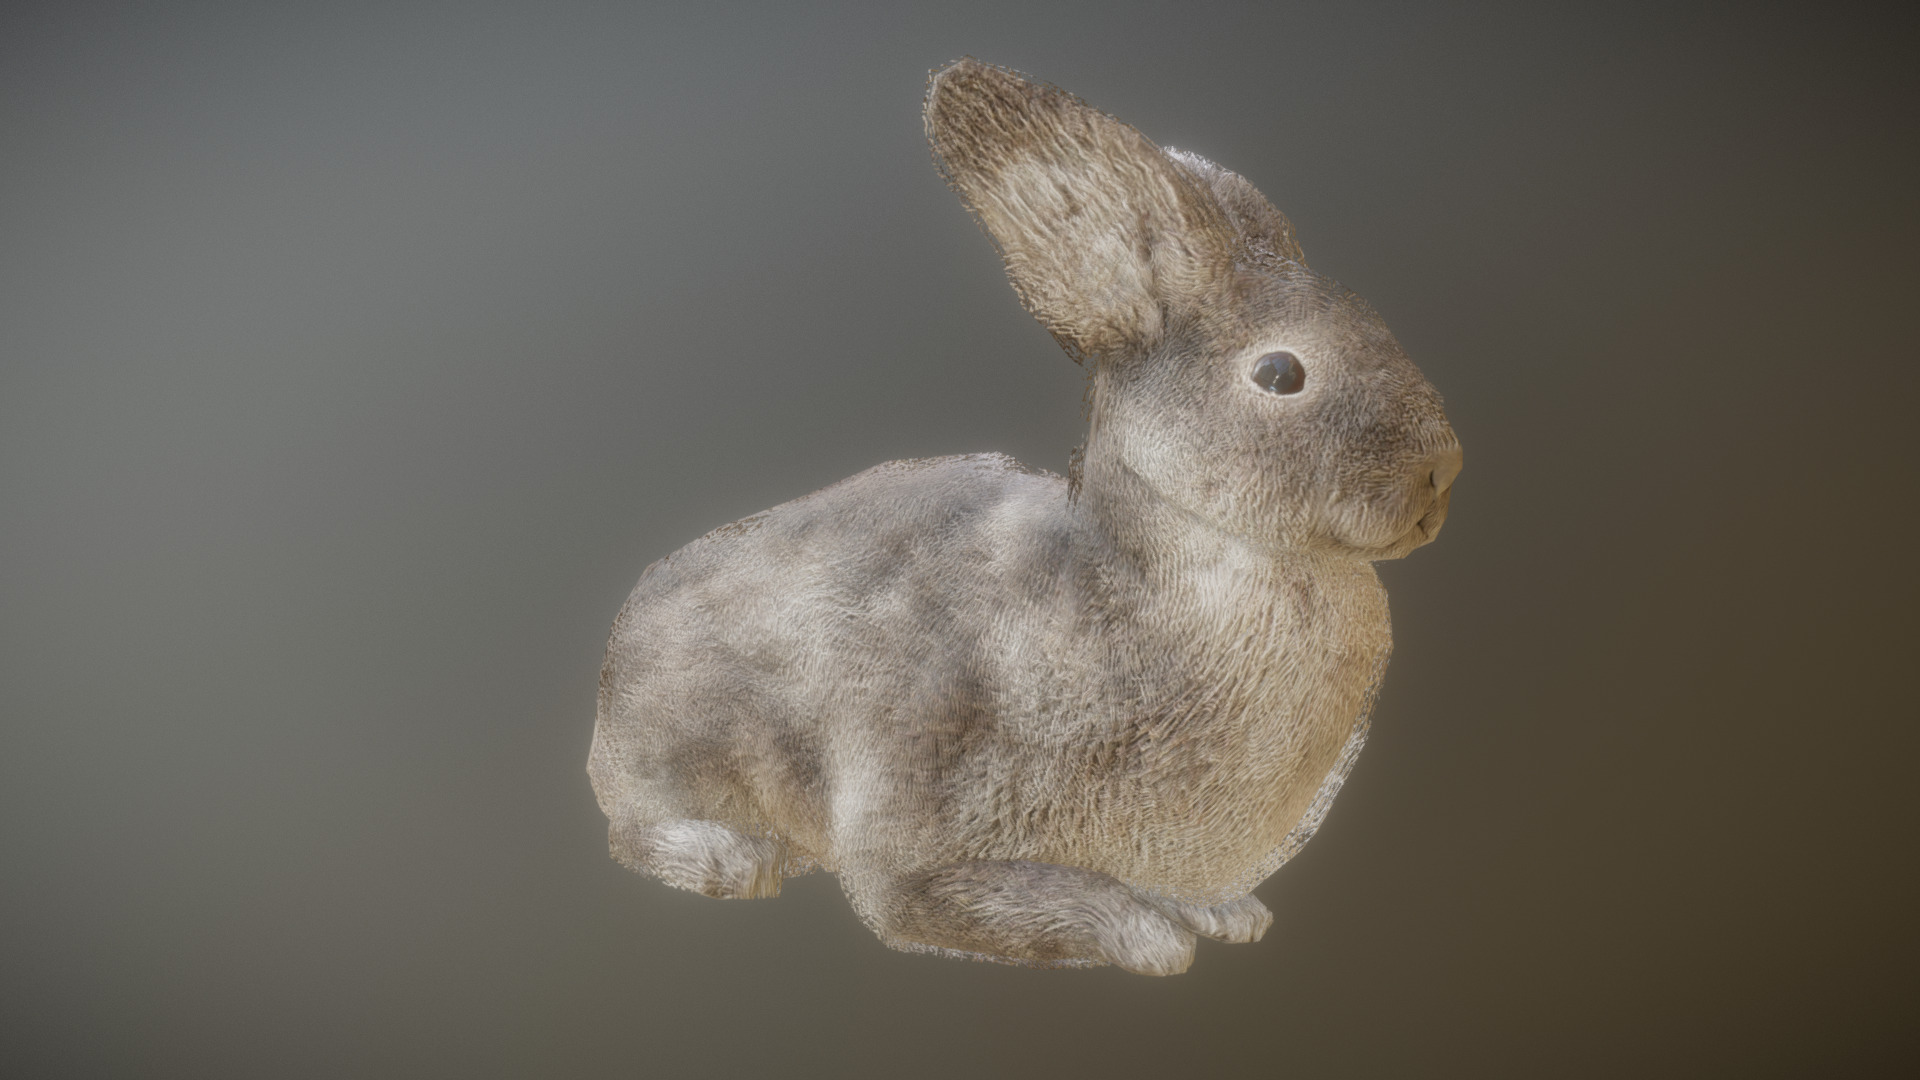 3D model RABBIT ANIMATIONS - This is a 3D model of the RABBIT ANIMATIONS. The 3D model is about a grey bunny rabbit.